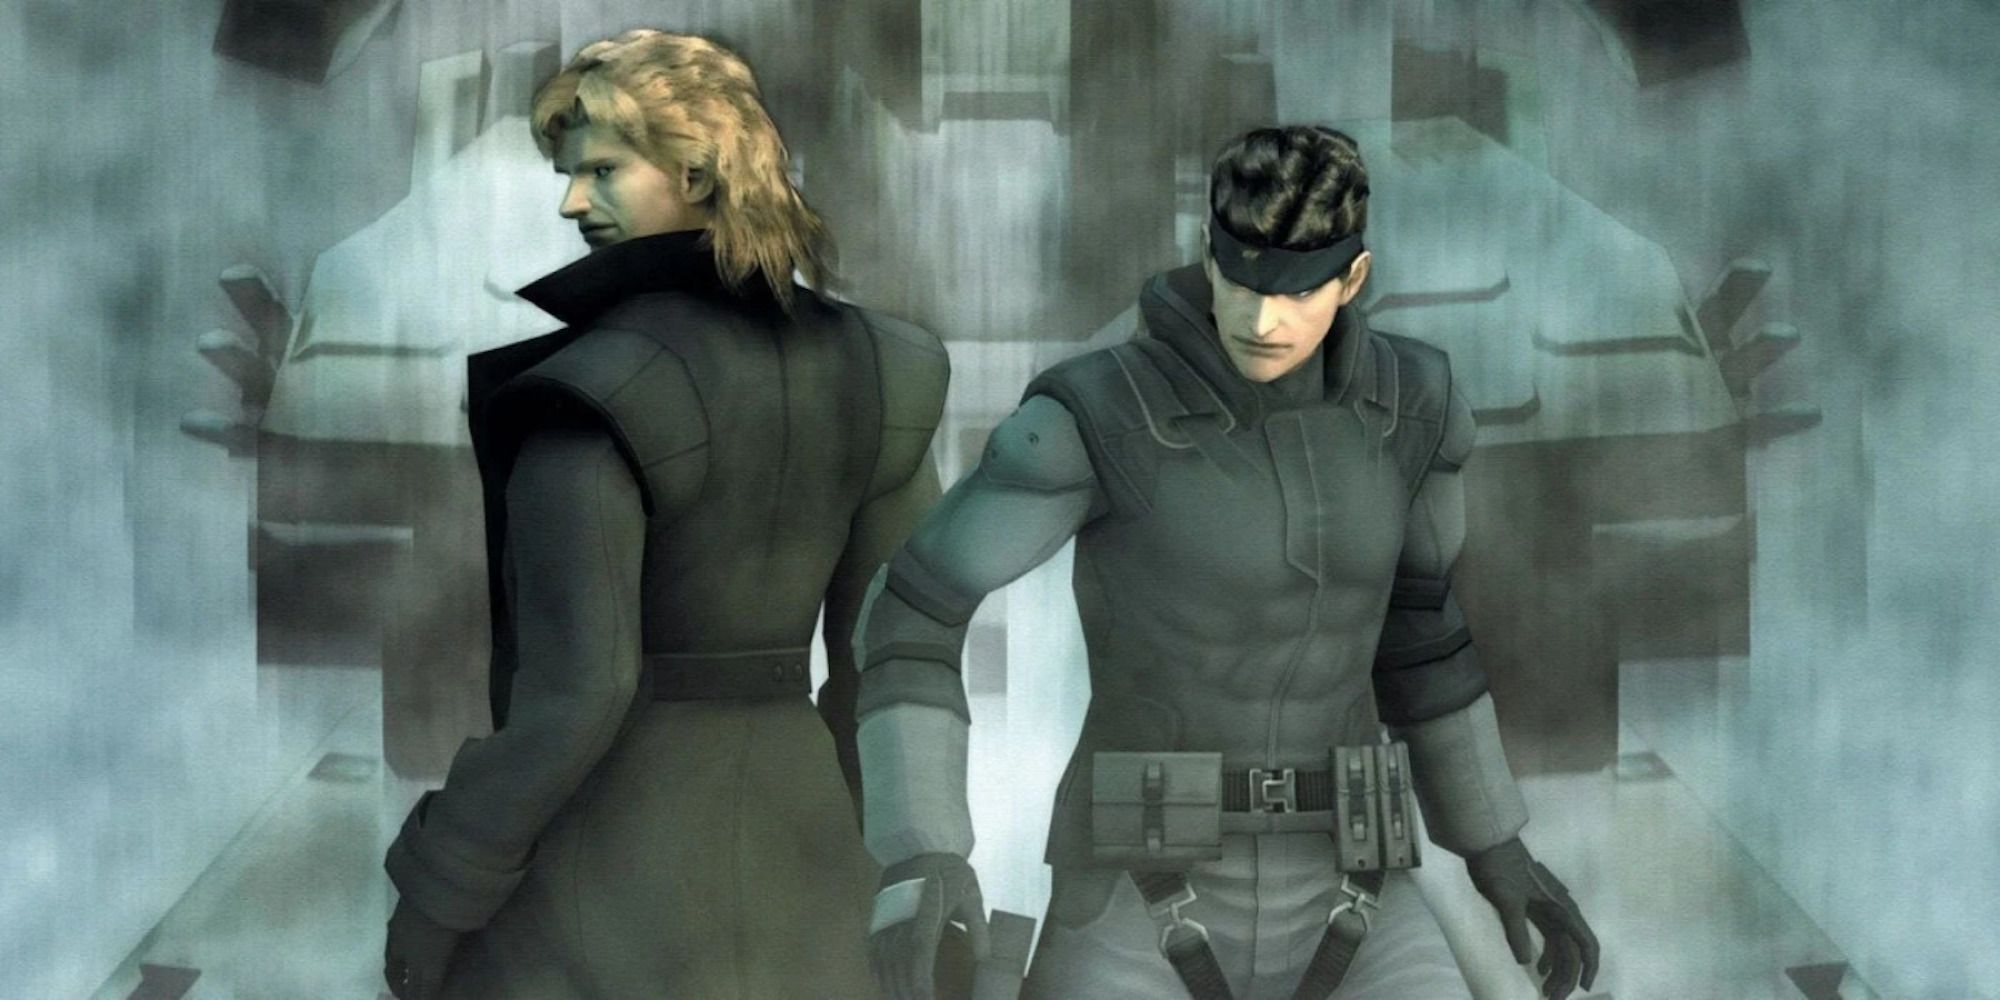 The box art featuring characters from Metal Gear Solid: The Twin Snakes